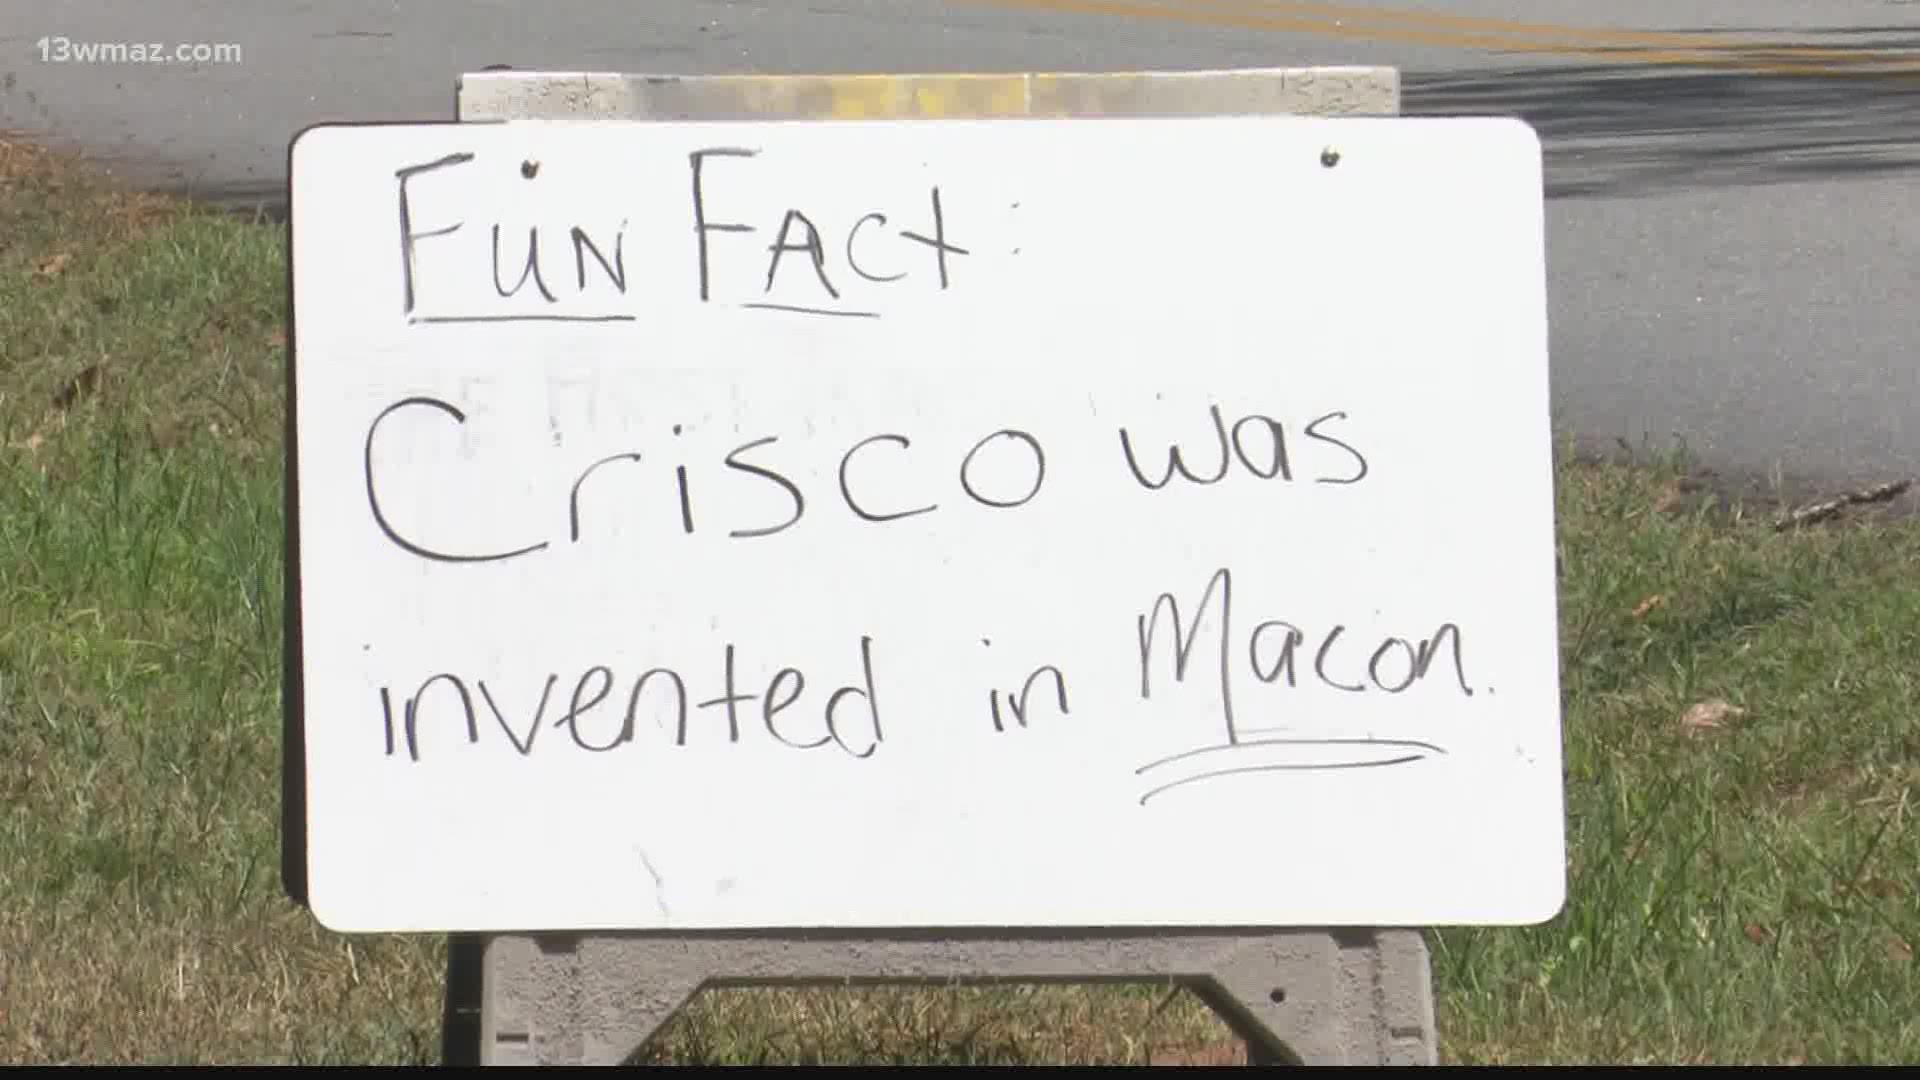 Barbara Loyd put a sign up to give people some fun facts as they ride through the neighborhood.